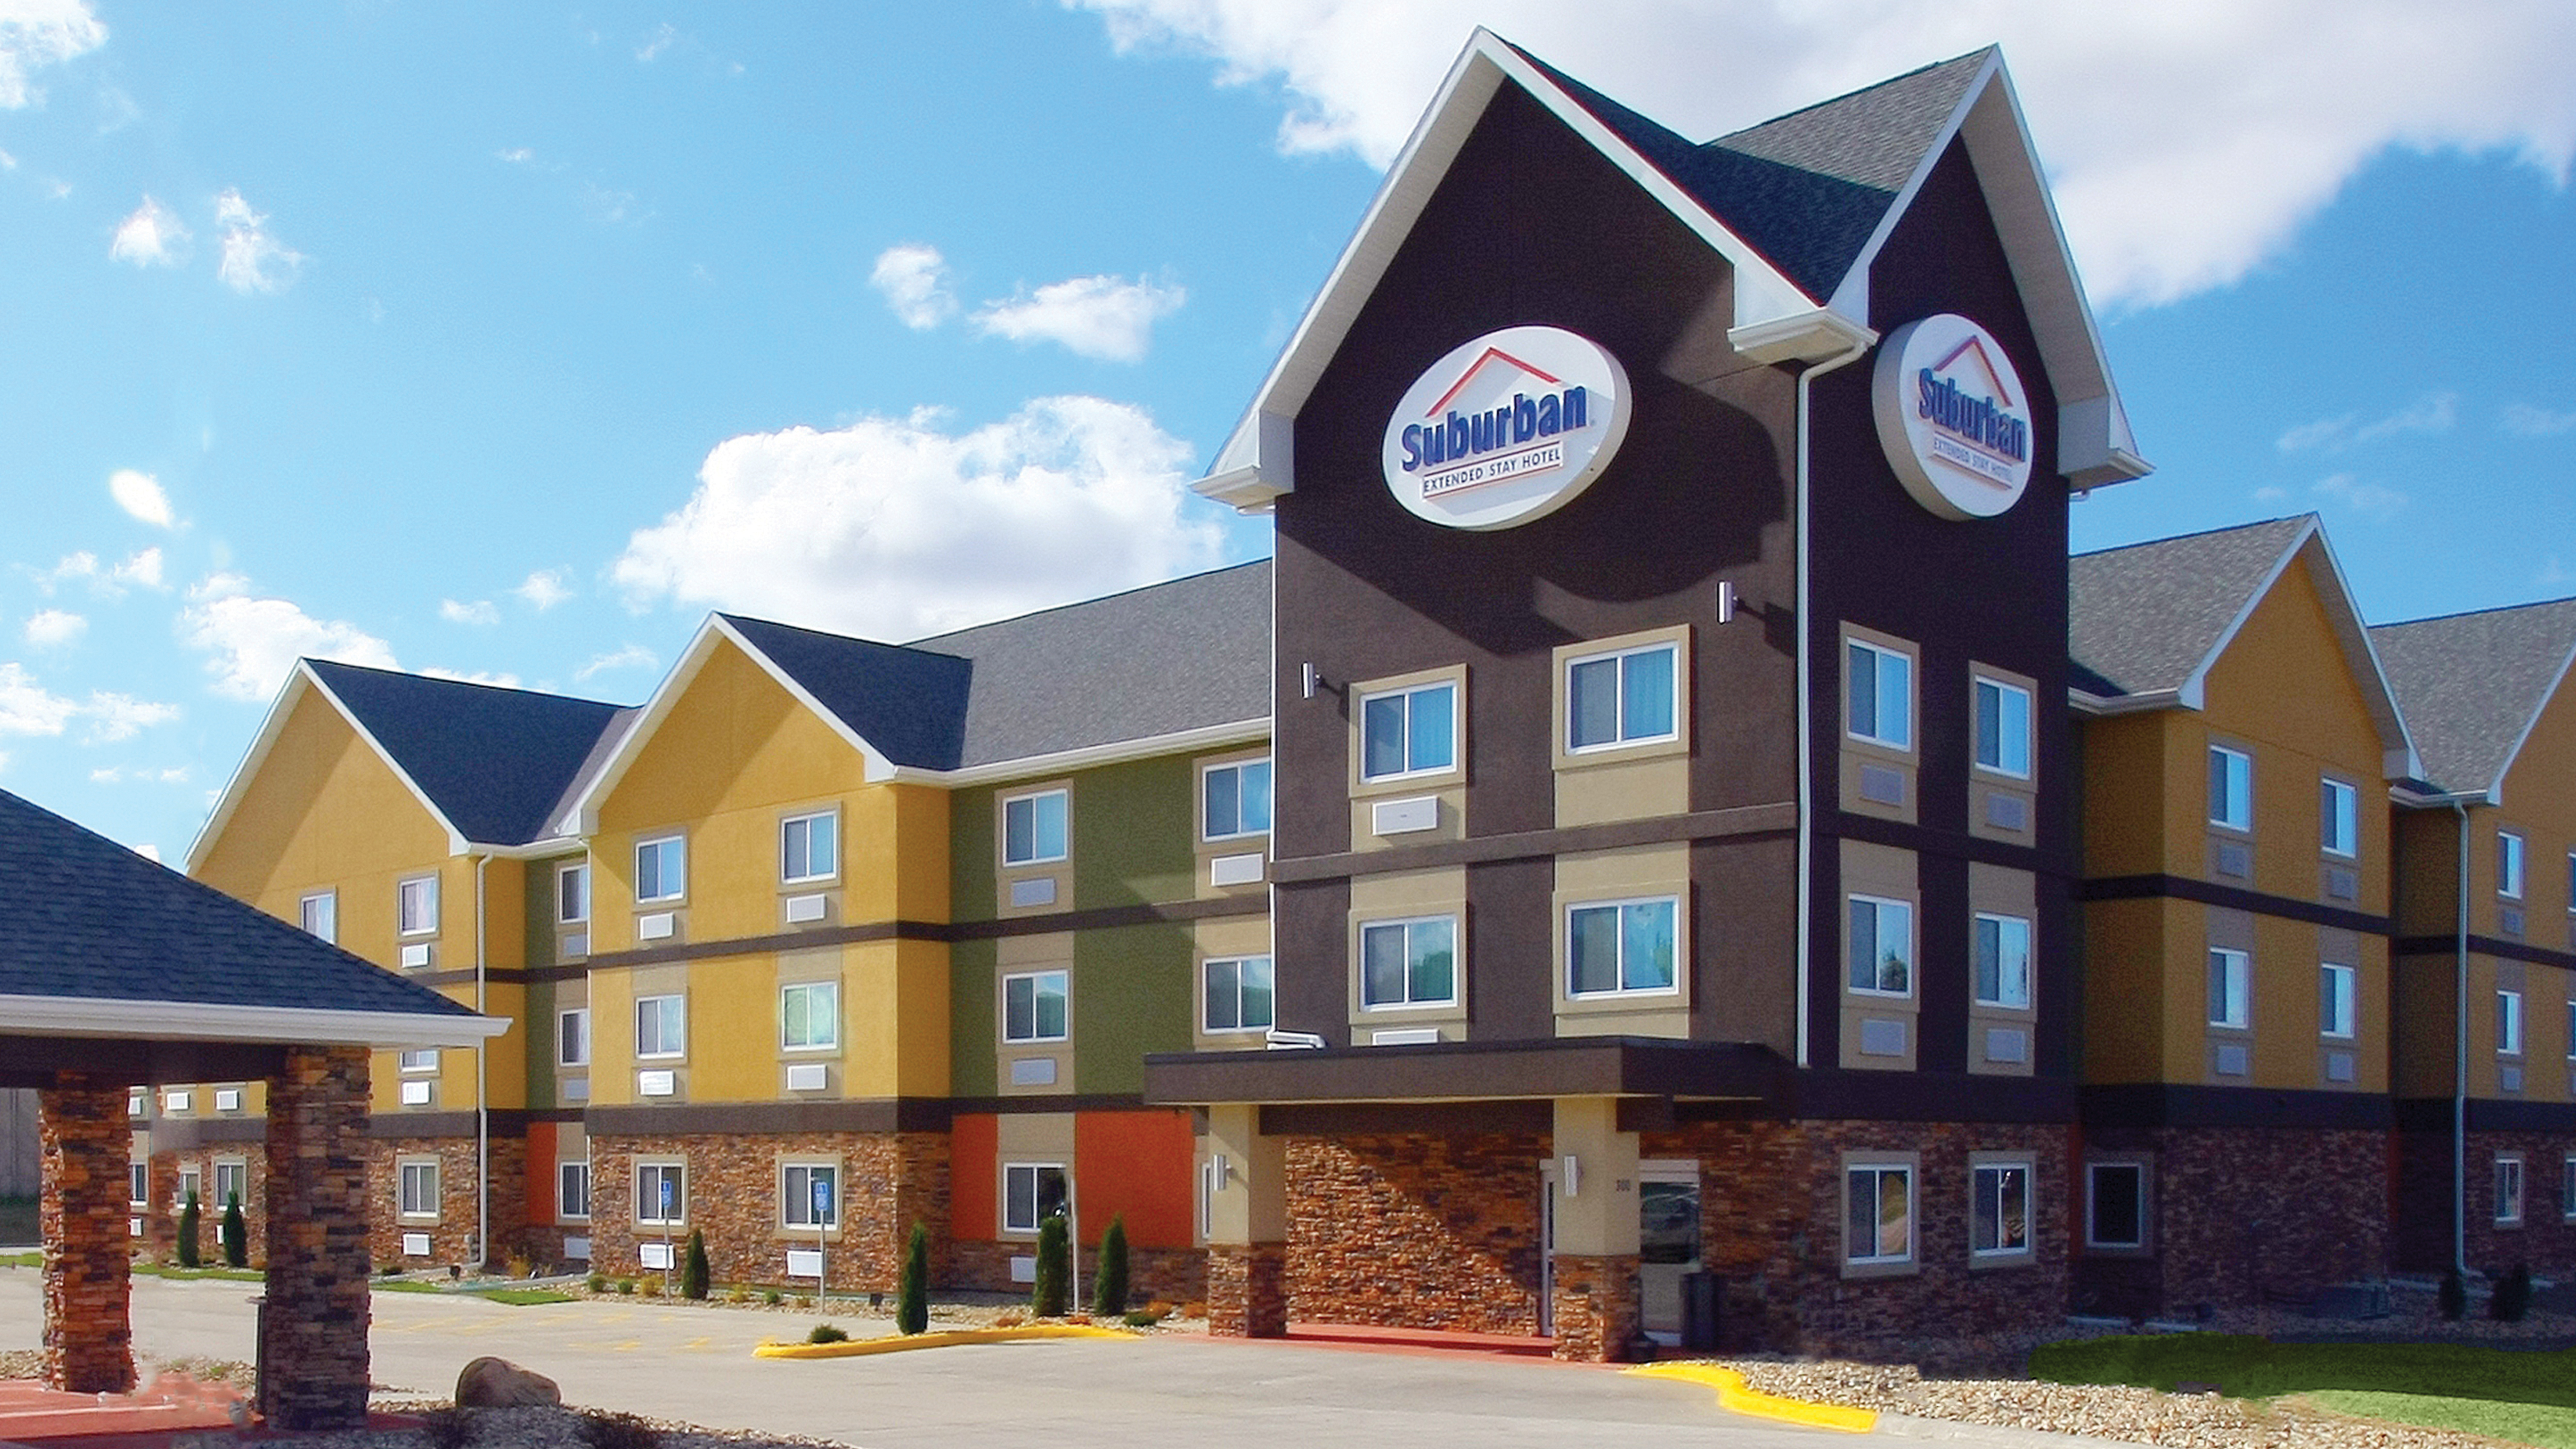 Suburban Extended Stay Hotel Exterior